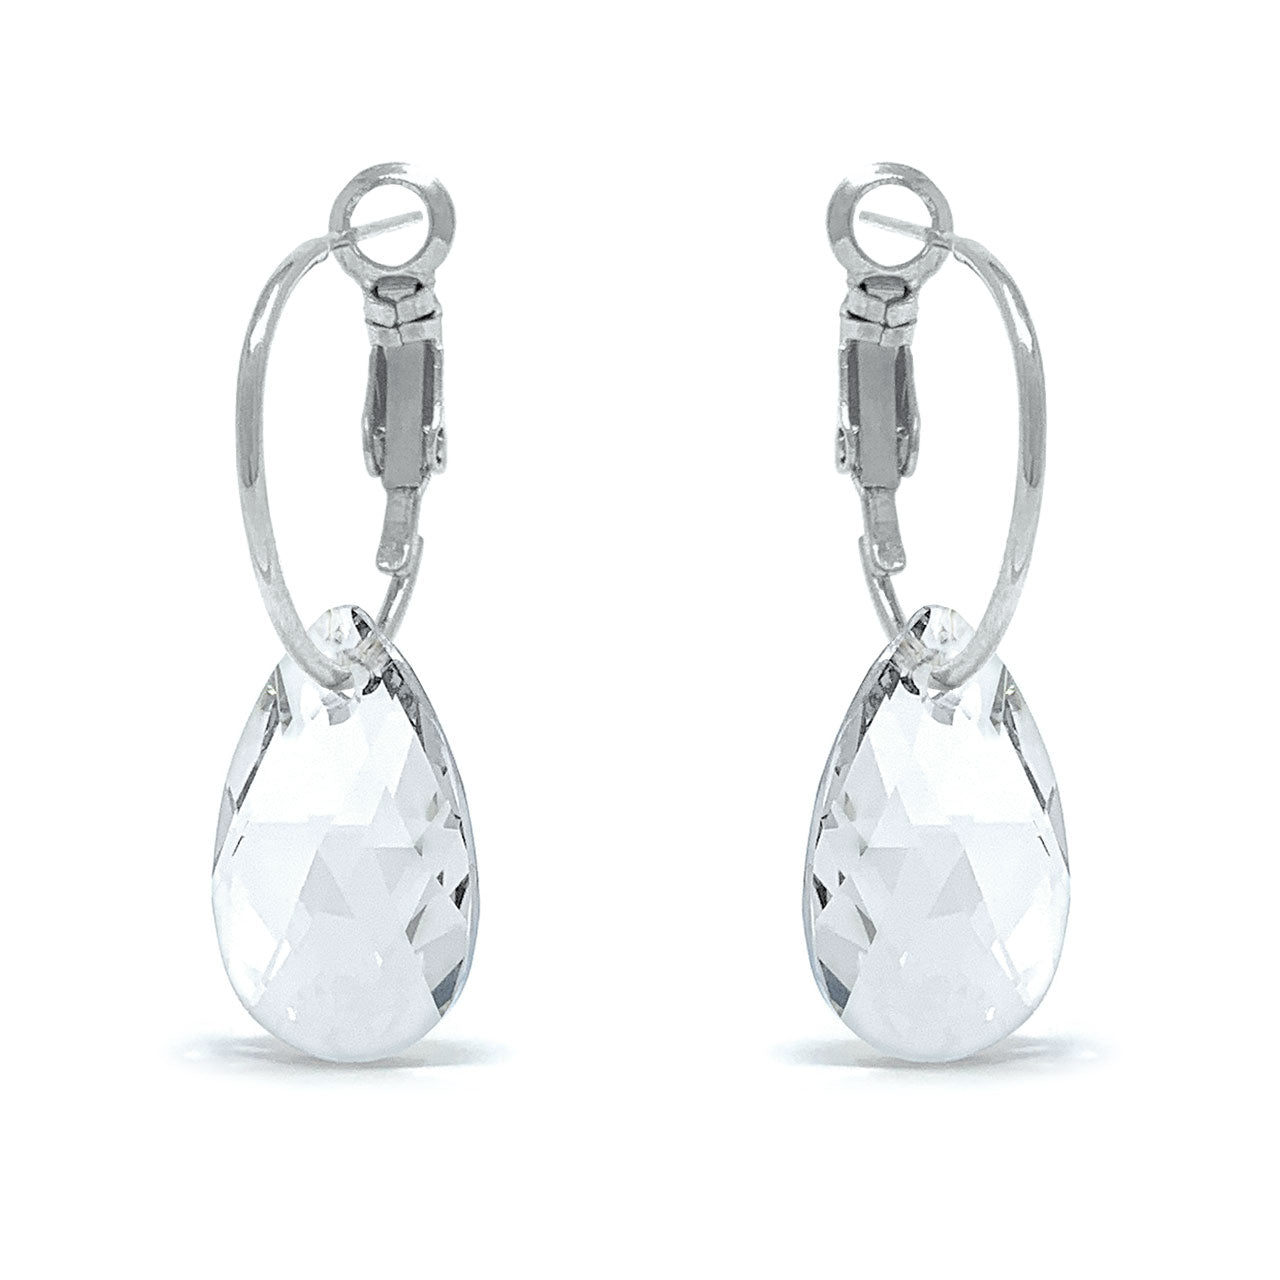 Aurora Small Drop Earrings with White Clear Pear Crystals from Swarovski Silver Toned Rhodium Plated - Ed Heart